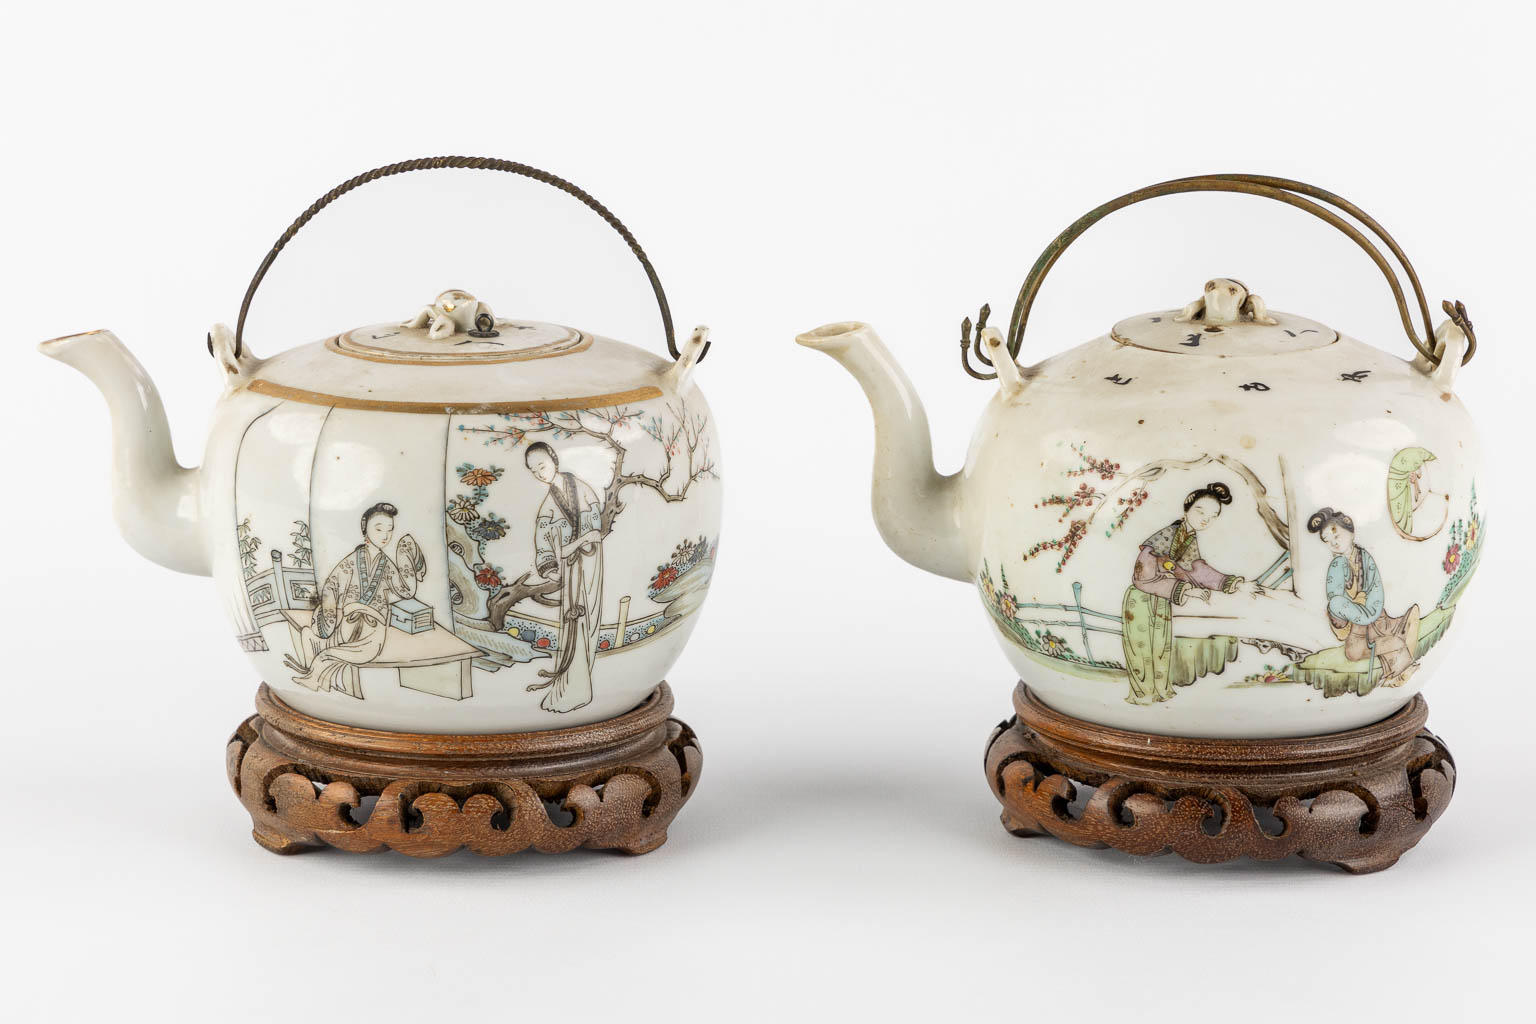 Two Chinese teapots, decorated with figurines. (L:13 x W:17,5 x H:10 cm) - Image 3 of 14